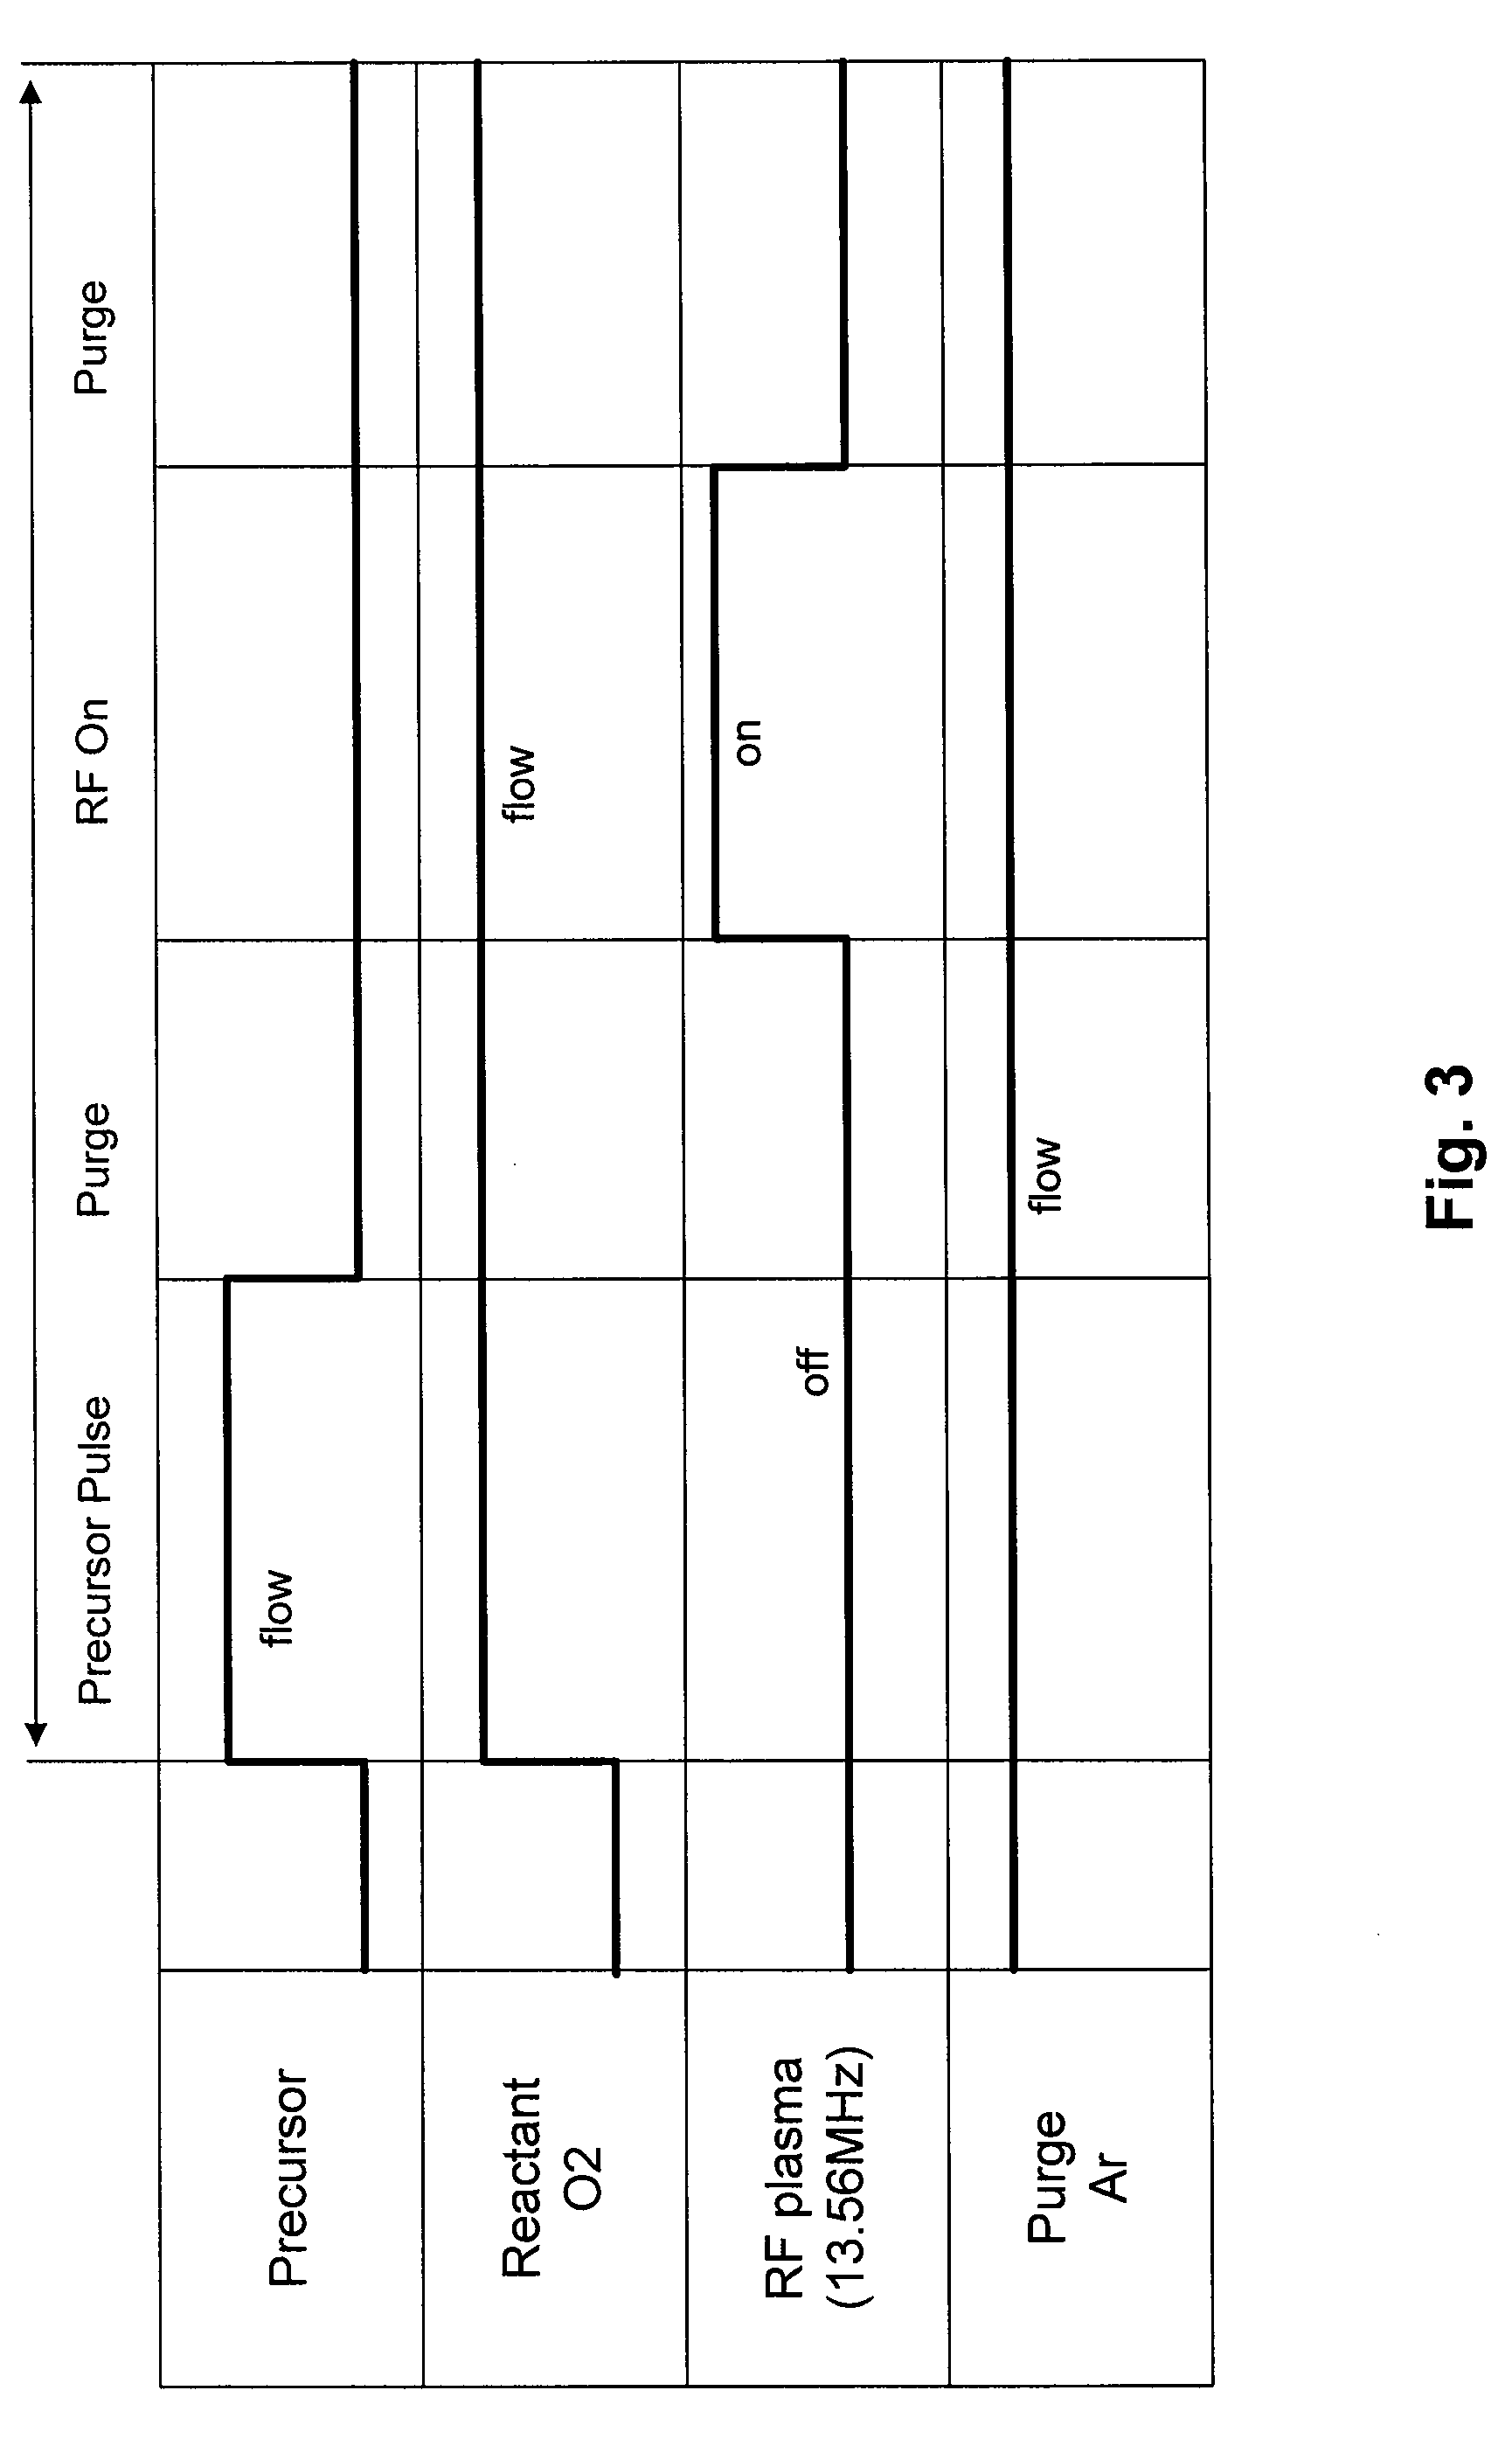 Method of depositing silicon oxide film by plasma enhanced atomic layer deposition at low temperature